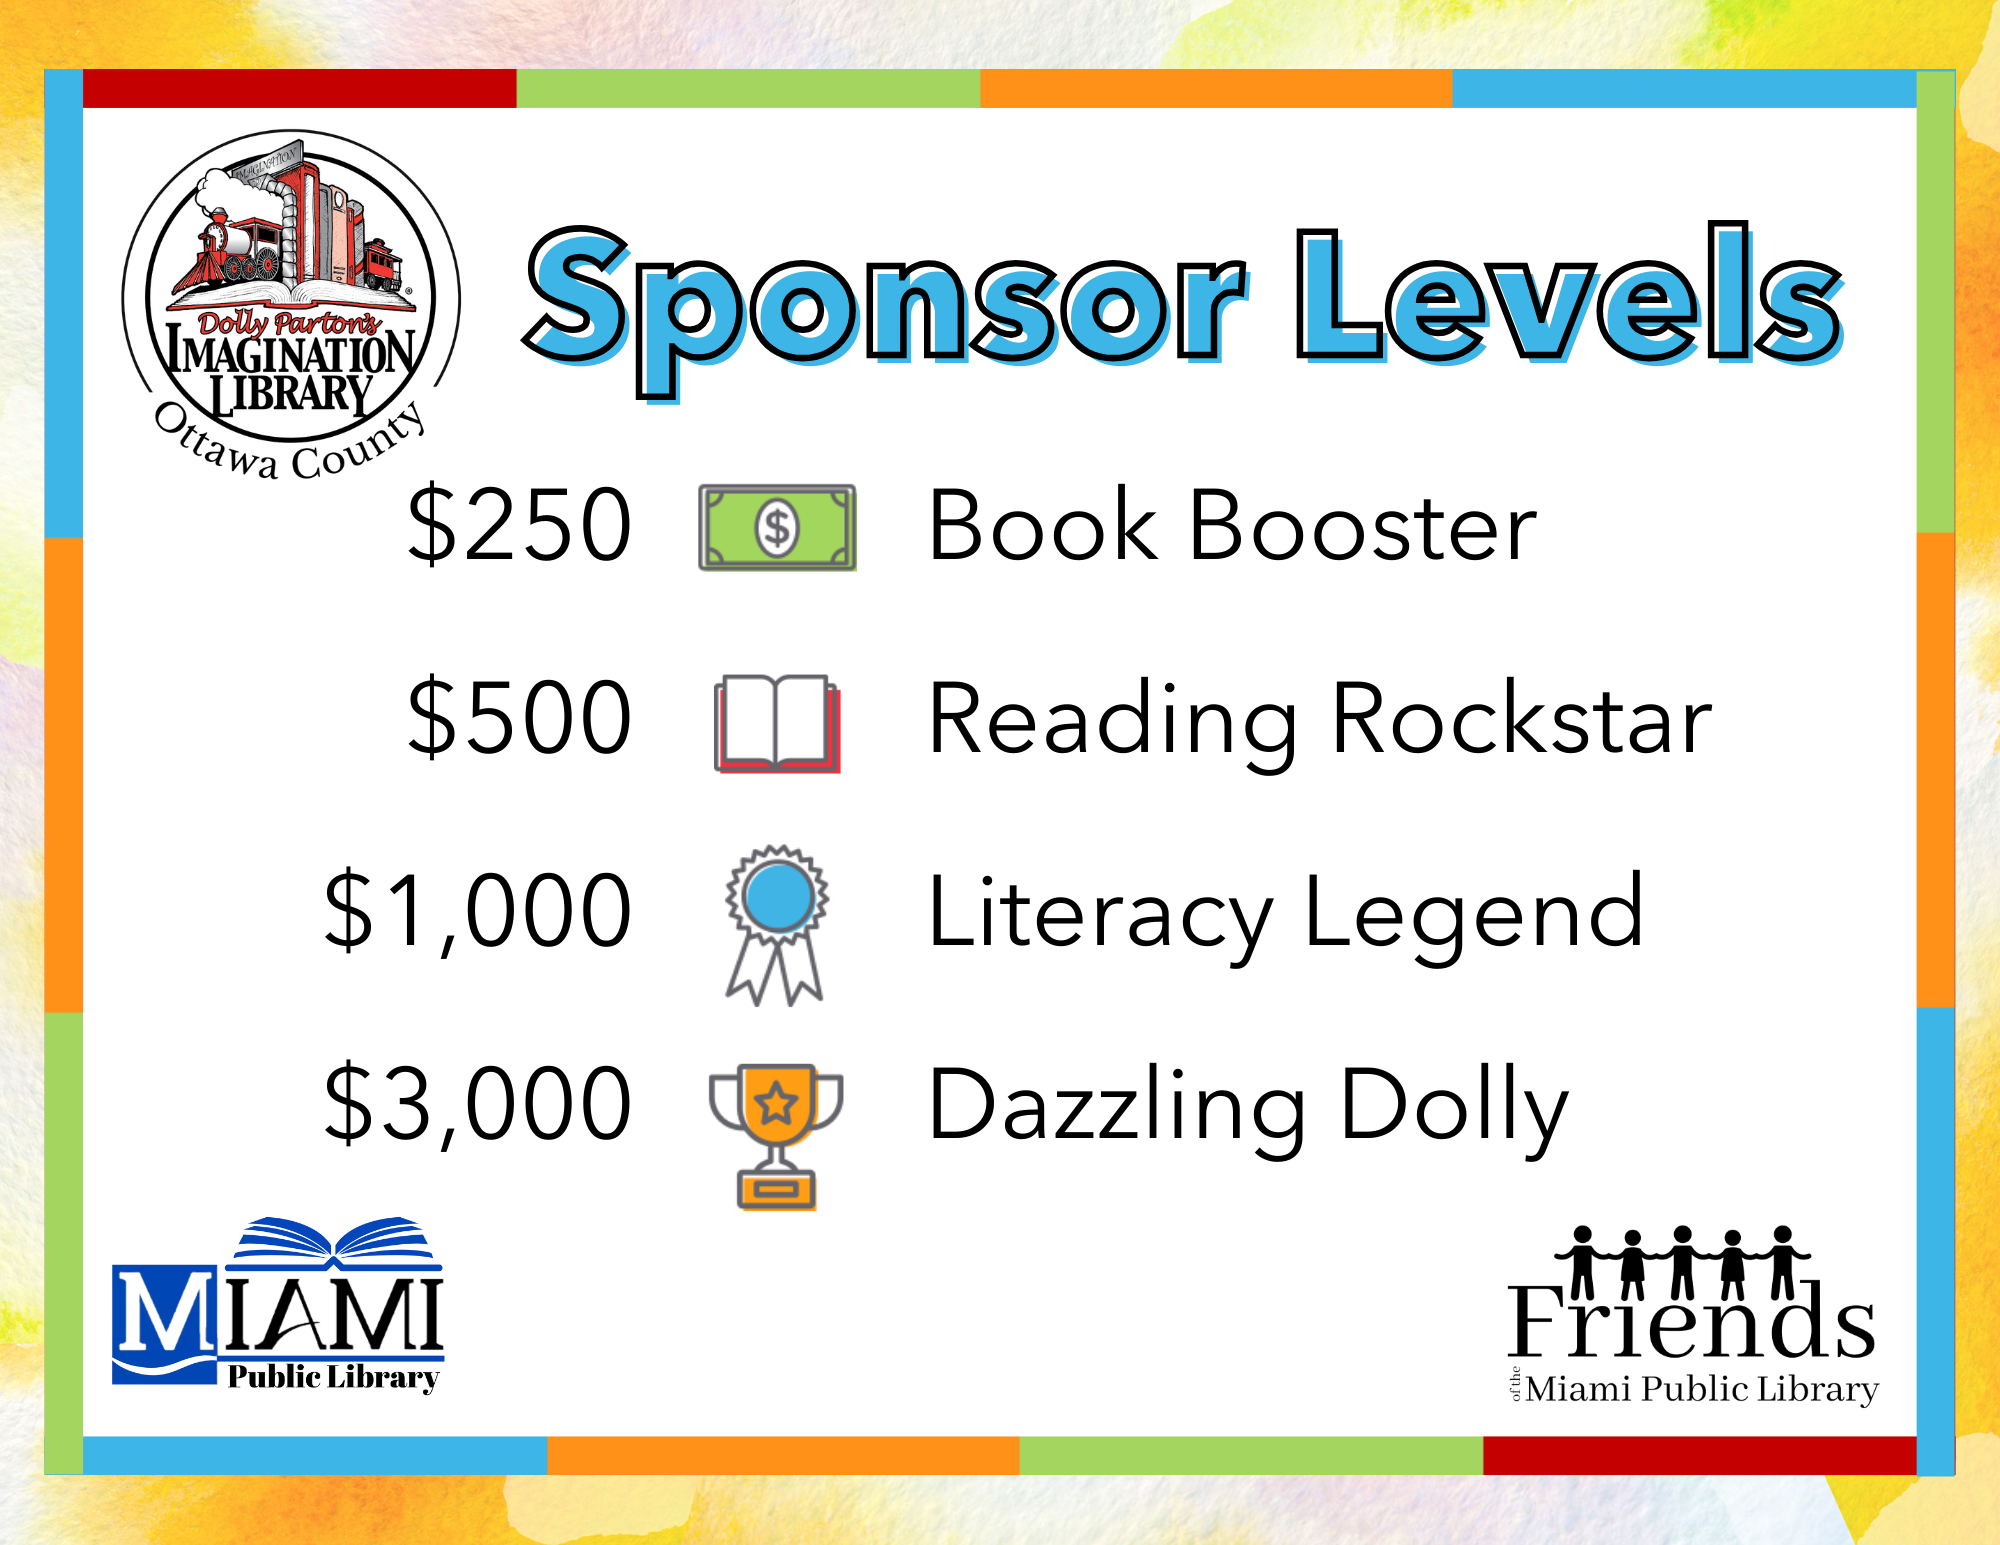 Ottawa County Imagination Library Sponsor Levels: $250 - Book Booster $500 - Reading Rockstar $1,000 - Literacy Legend $3000+ - Dazzling Dolly